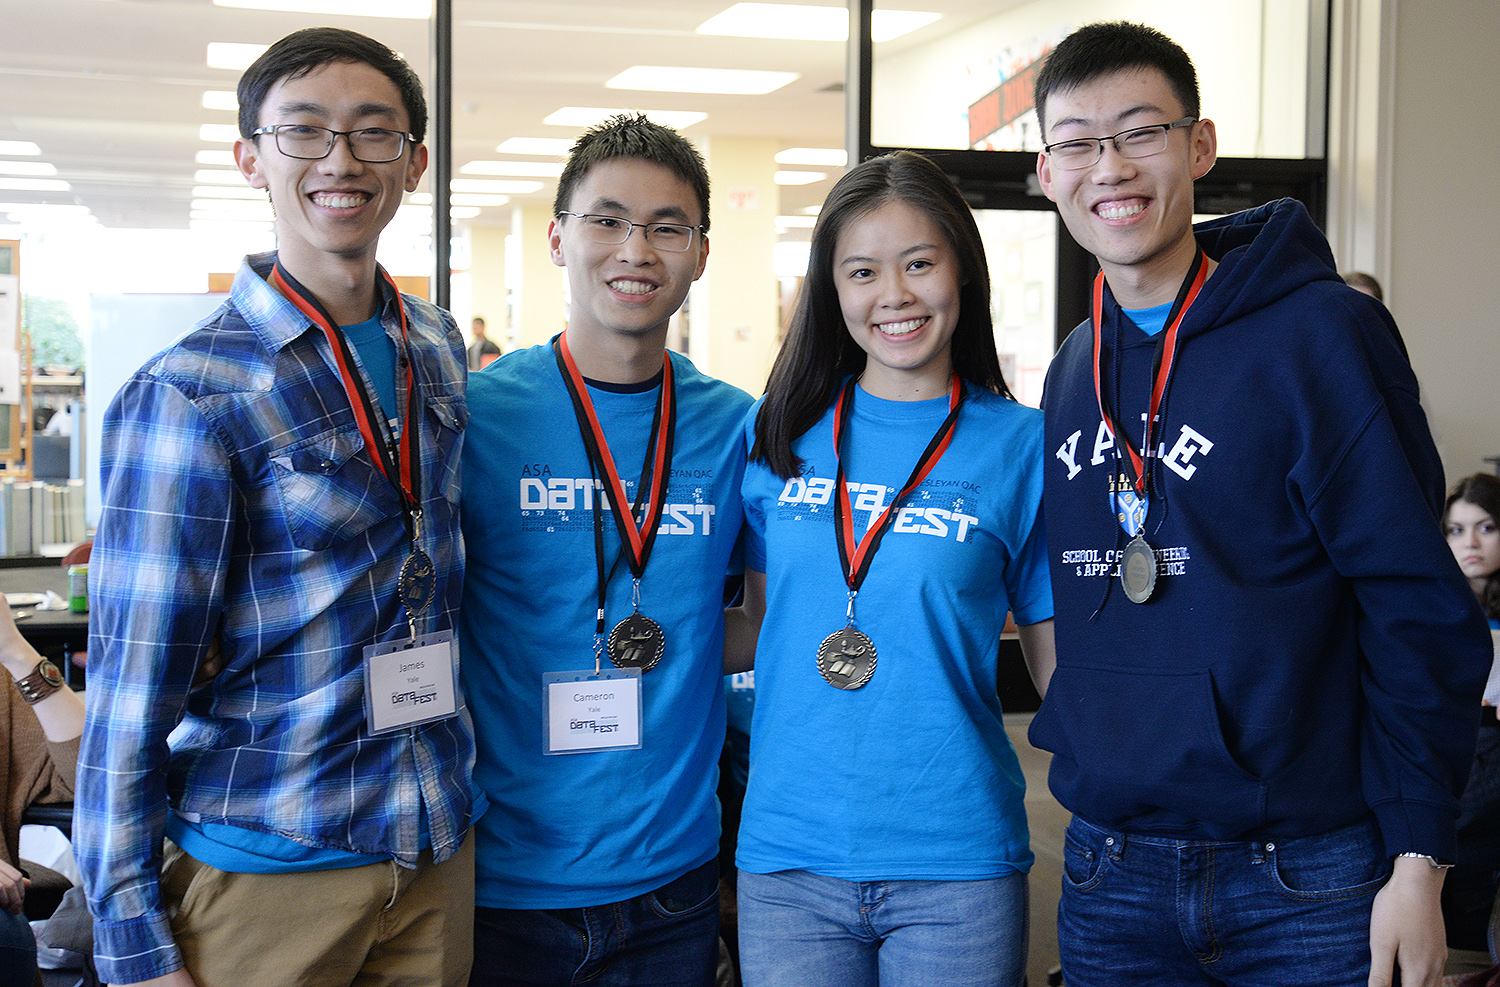 Anscombe’s Quartet, a team from Yale, won Best in Show. Students included Valerie Chen, James Diao, Alan Liu and Cameron Yick.